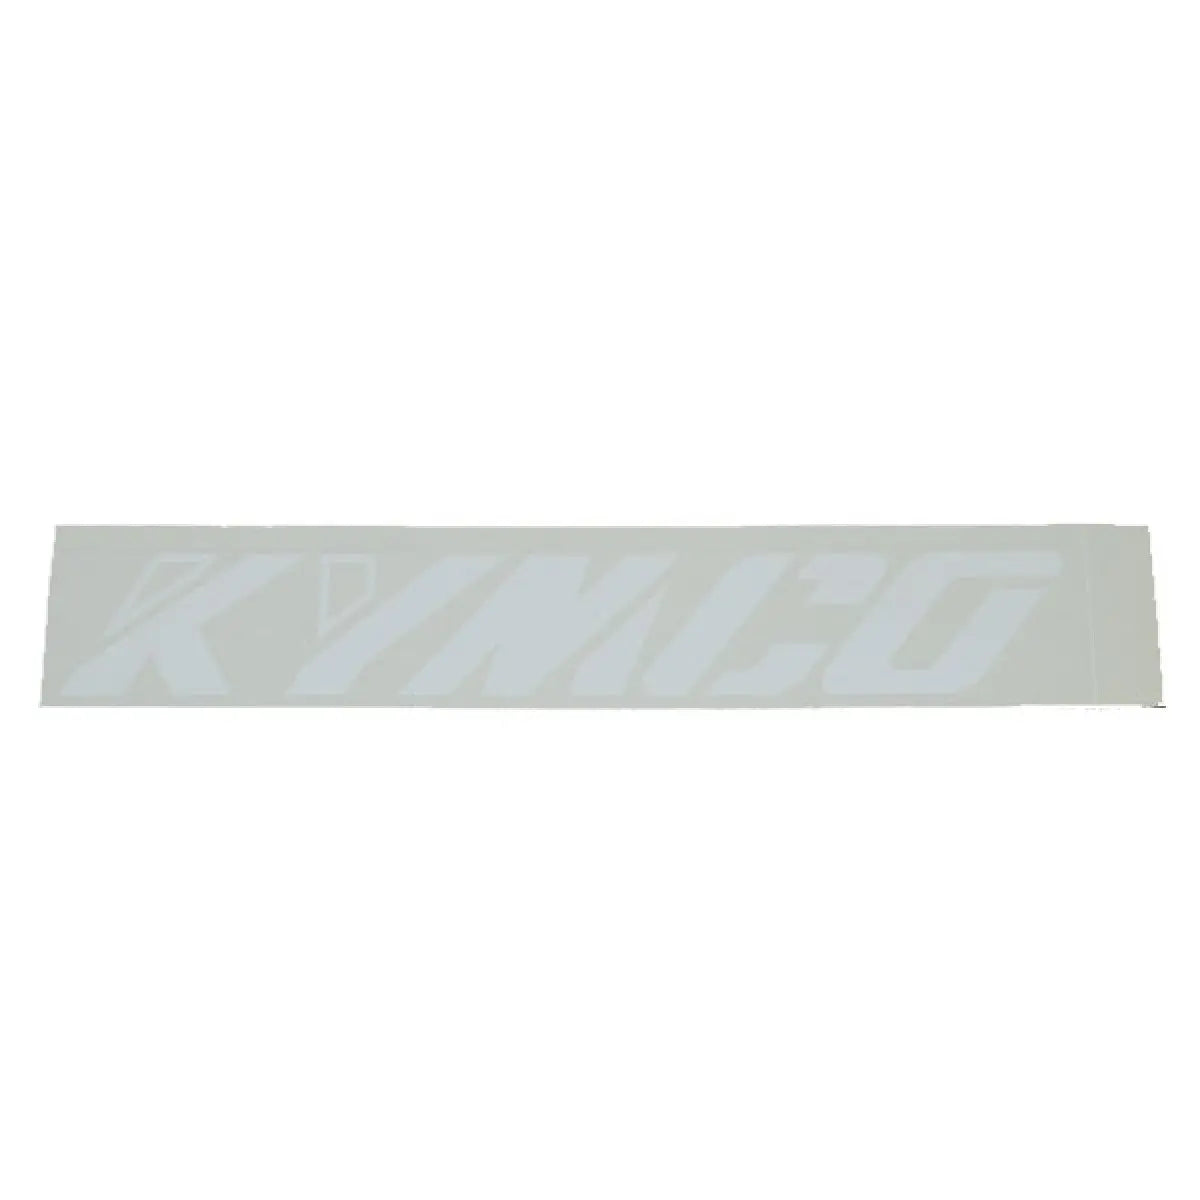 085020 : KYMCO WOORD WIT 190X30MM AE-trading